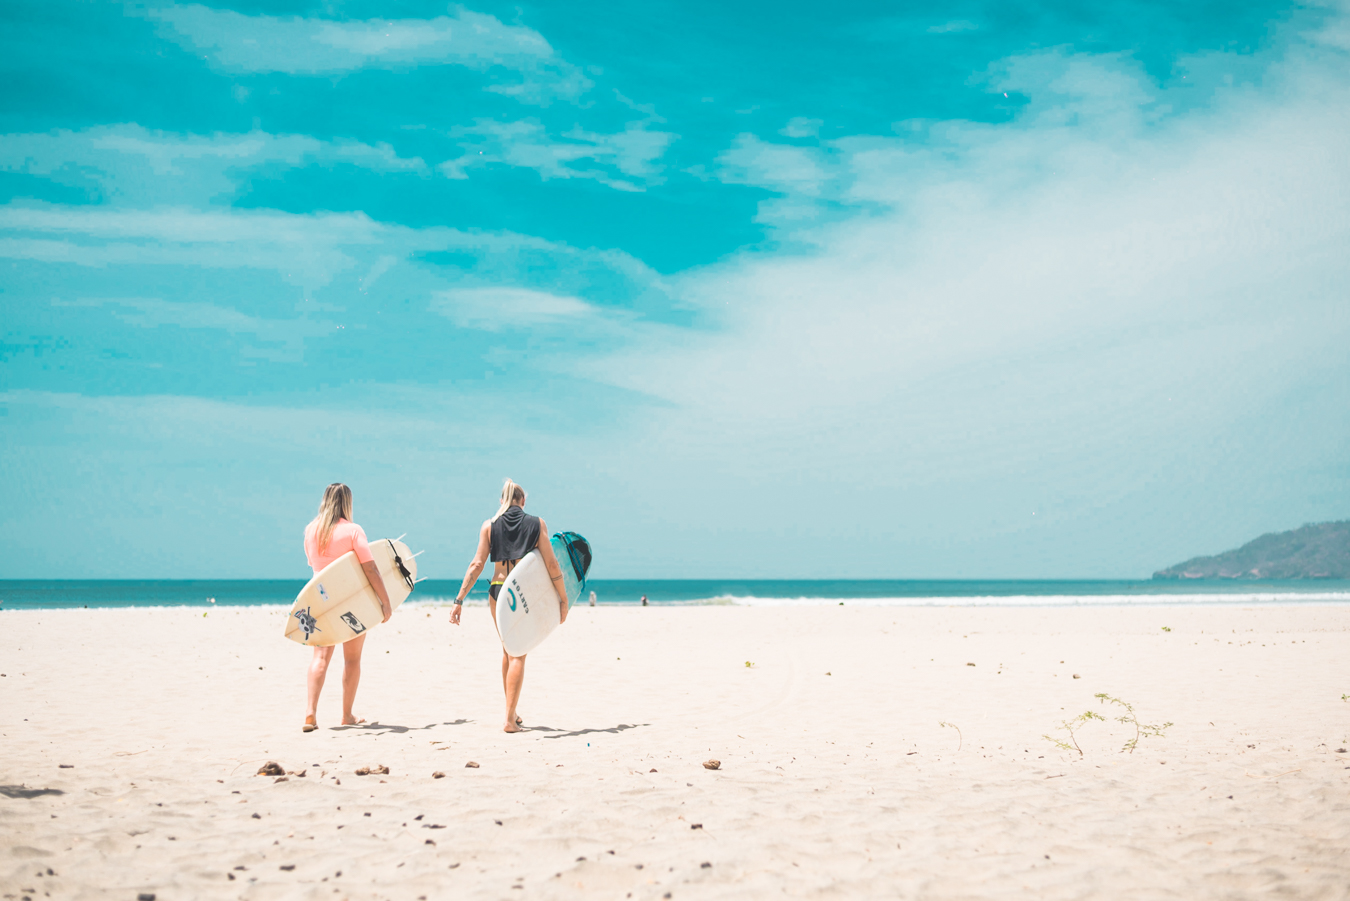 Dreamsea Costa Rica Surf Camp | backpacking, travel, hostel, surf, and yoga camp | Media Files | Lifestyle Image of Surf and Yoga Camp Resort | Image of 2 people walking on a beach with surfboards in their hands.